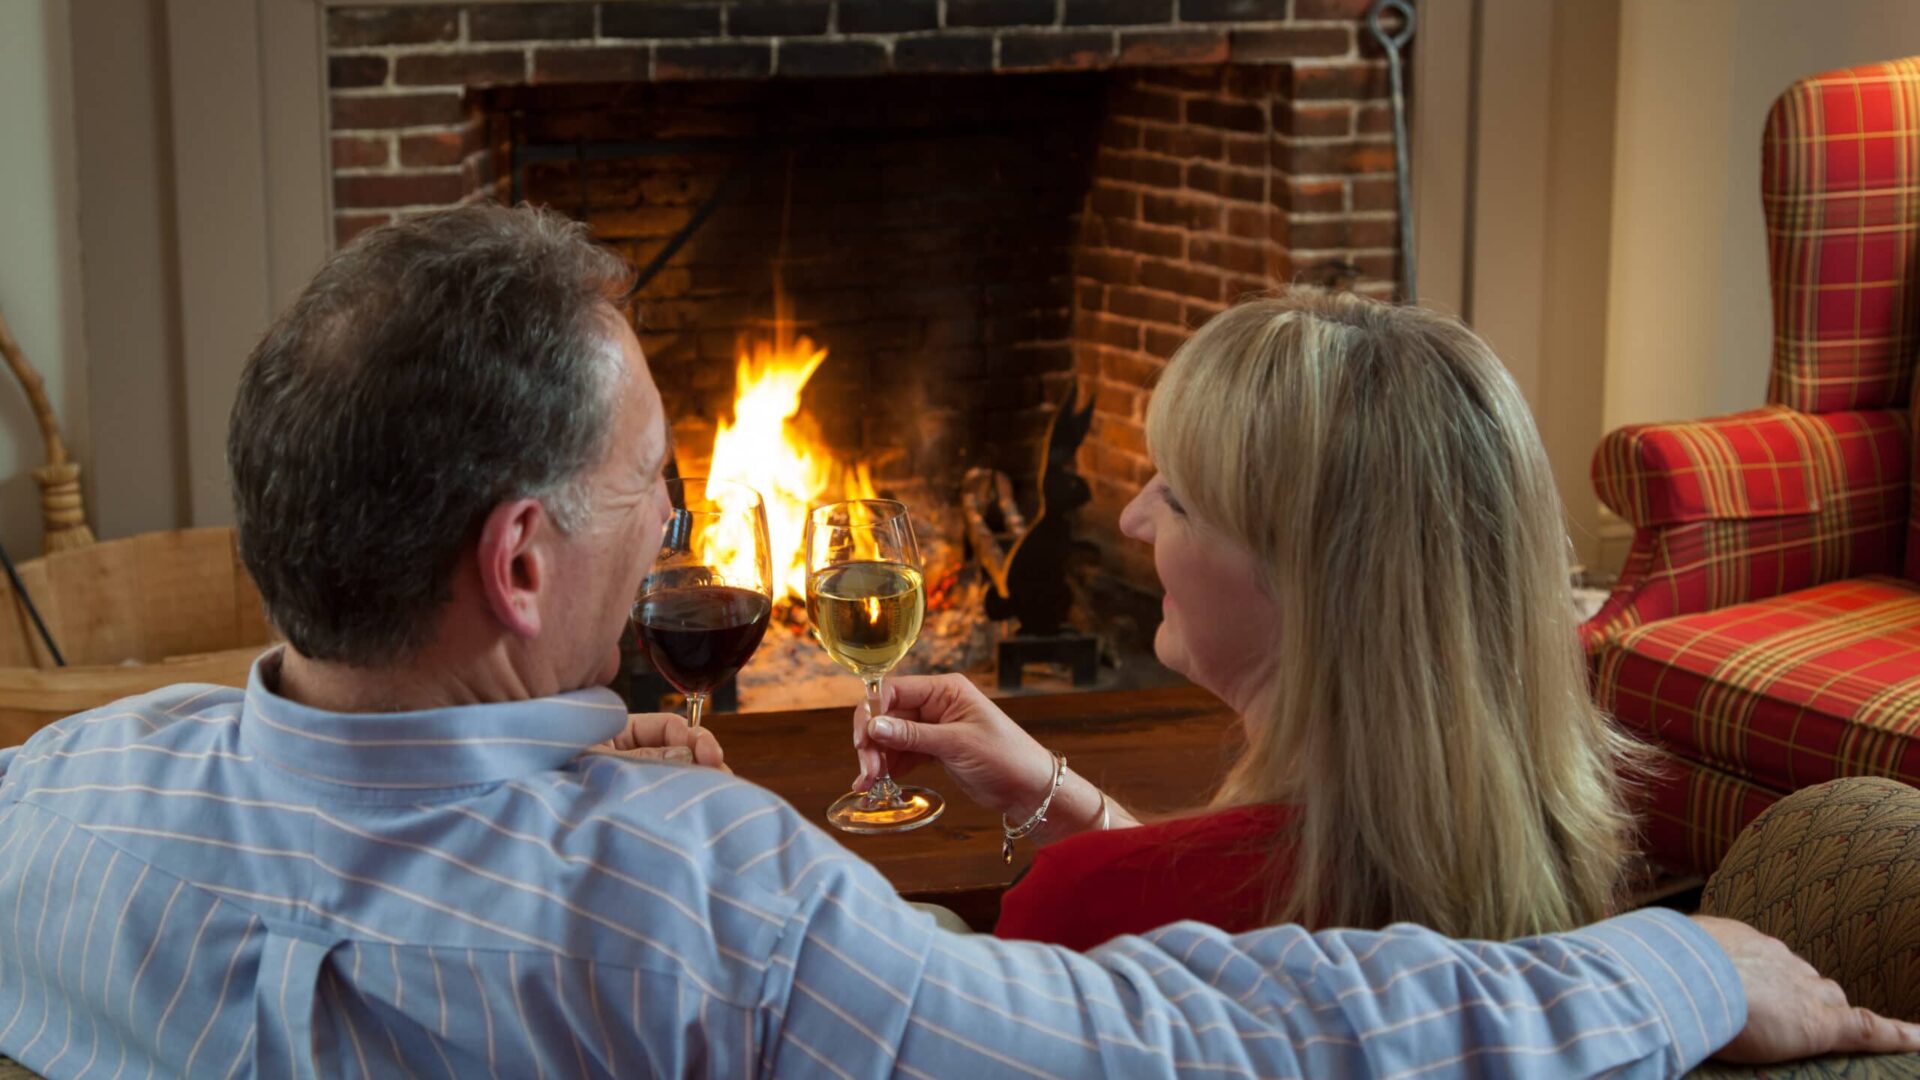 Couple toasting each other with wine in front of a fireplace|discount winter travel deals